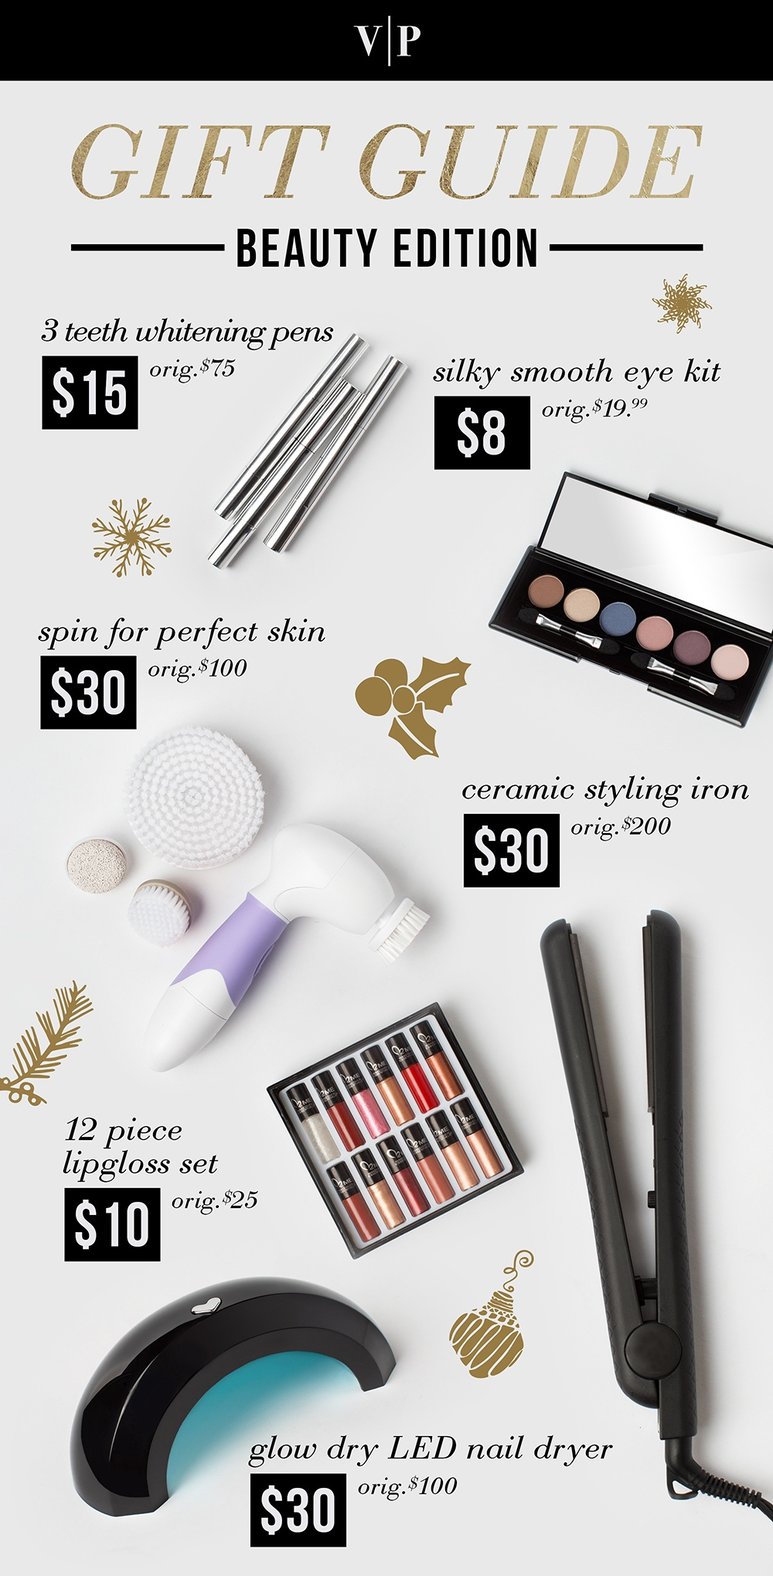 Vanity Planet Holiday Gift Guide - Beauty Edition